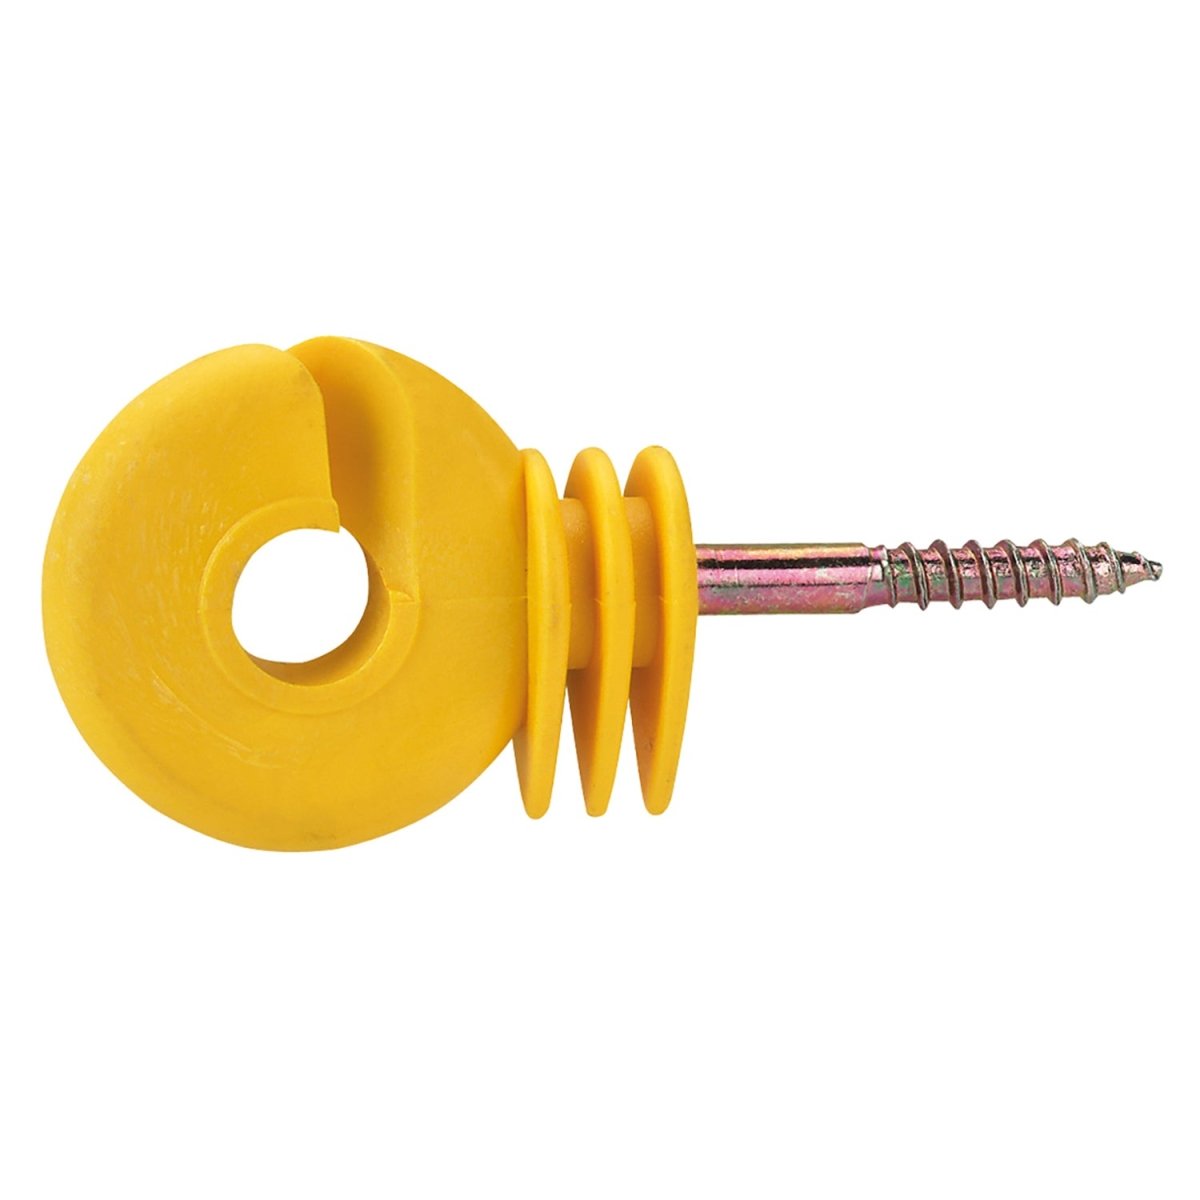 Corral Ring Insulator Compact - Yellow - 25Pack